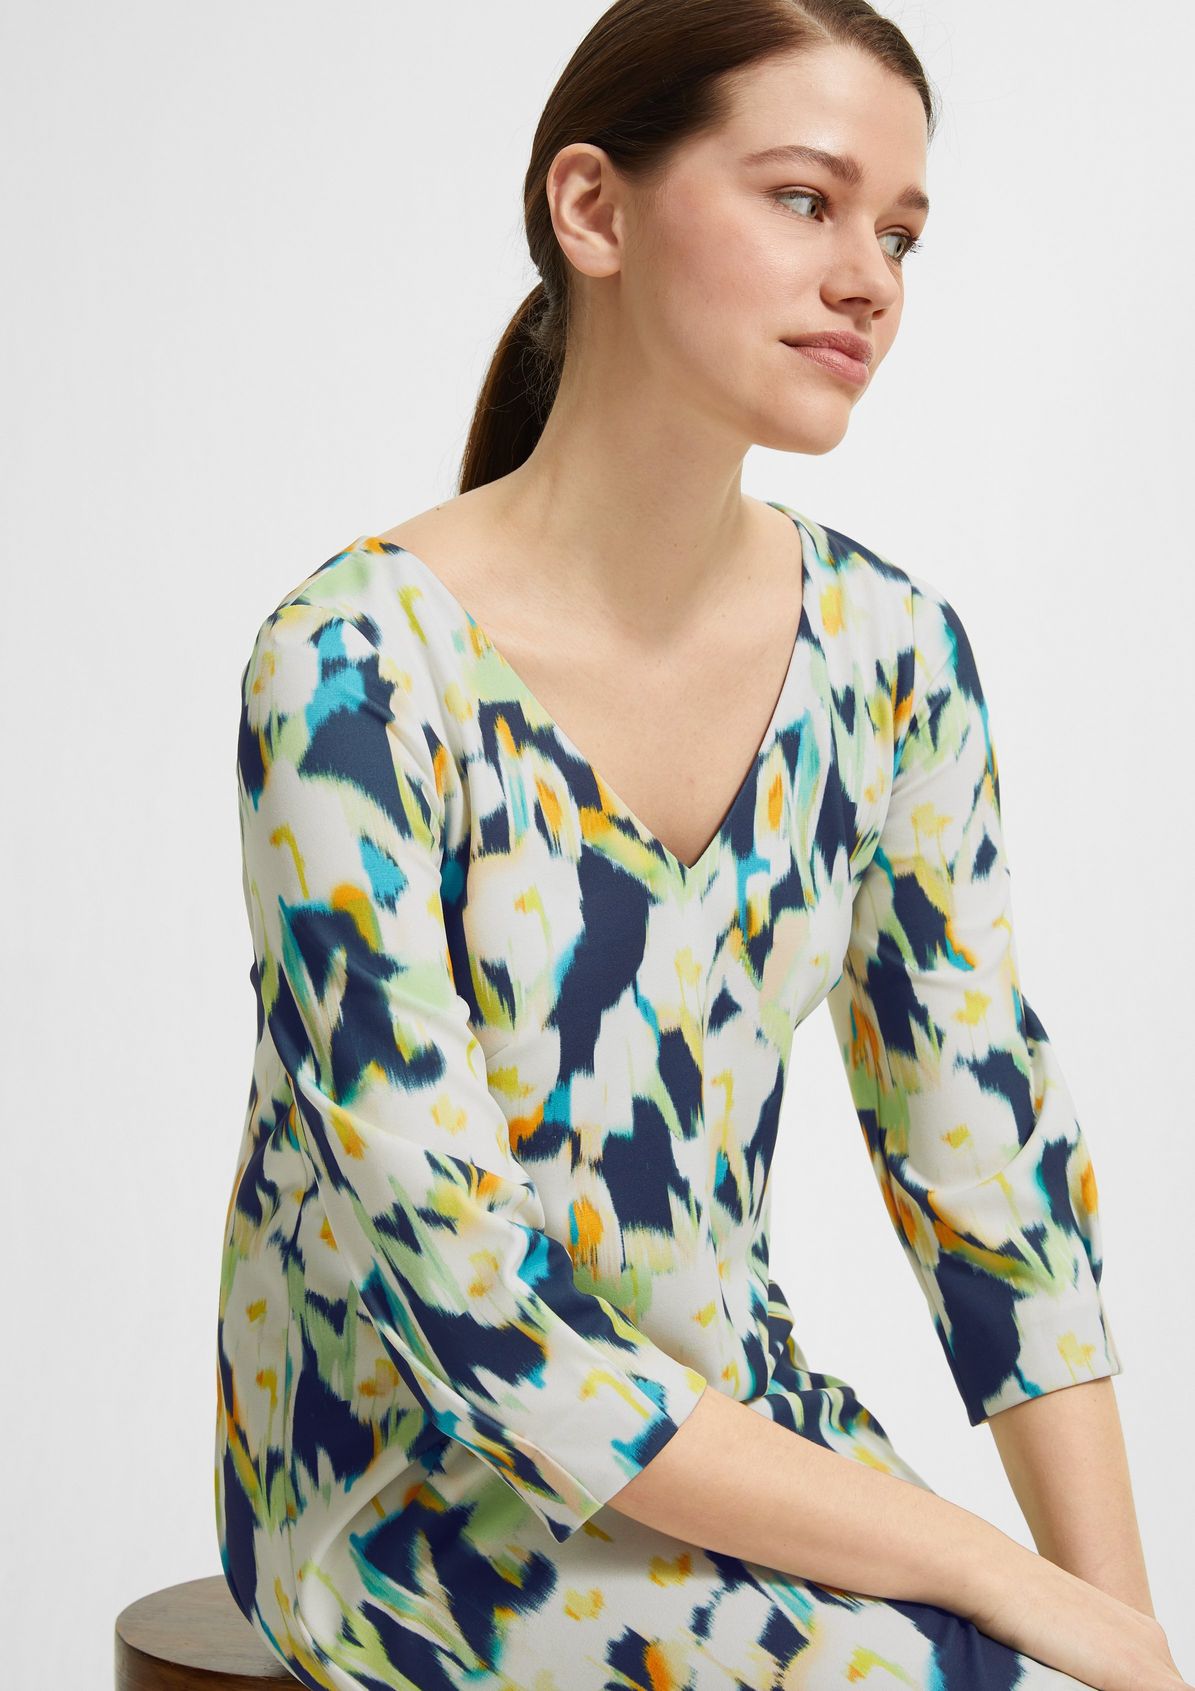 Jersey dress with an all-over print from comma